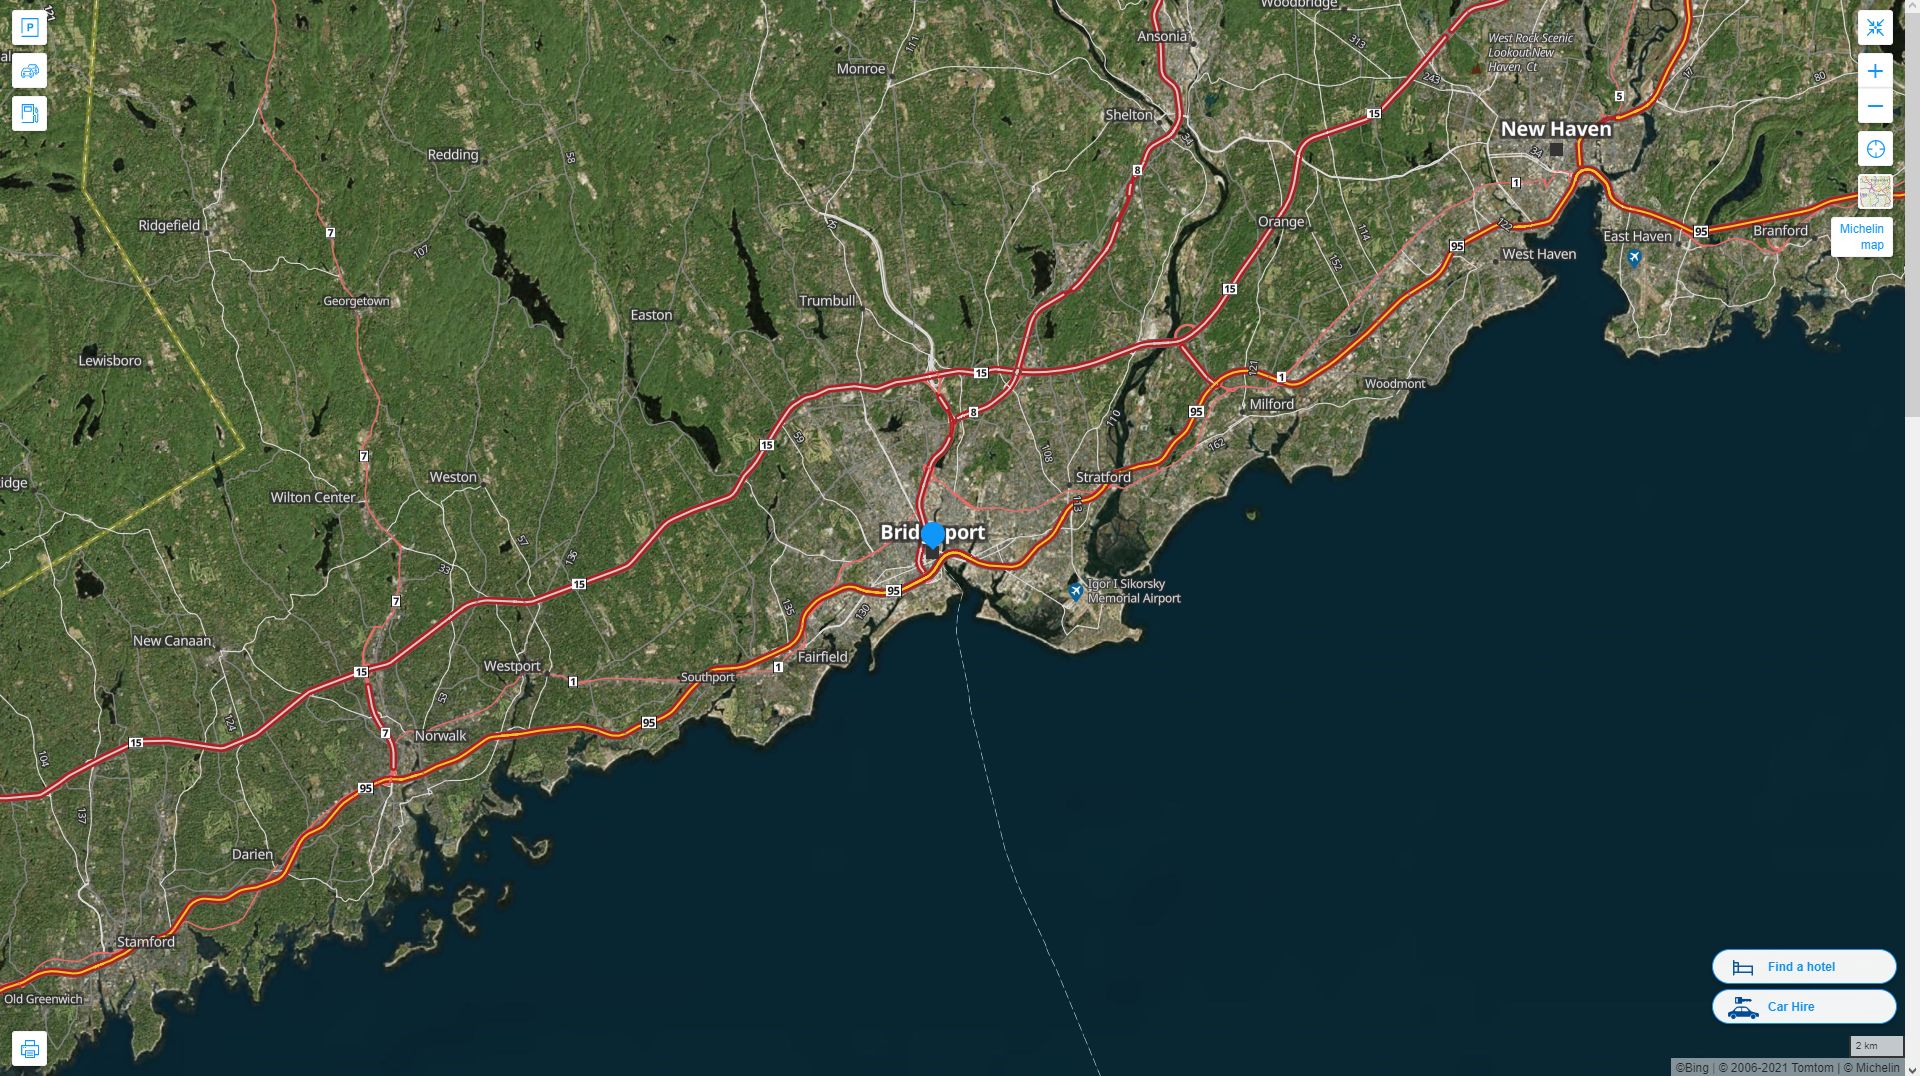 Bridgeport Connecticut Highway and Road Map with Satellite View